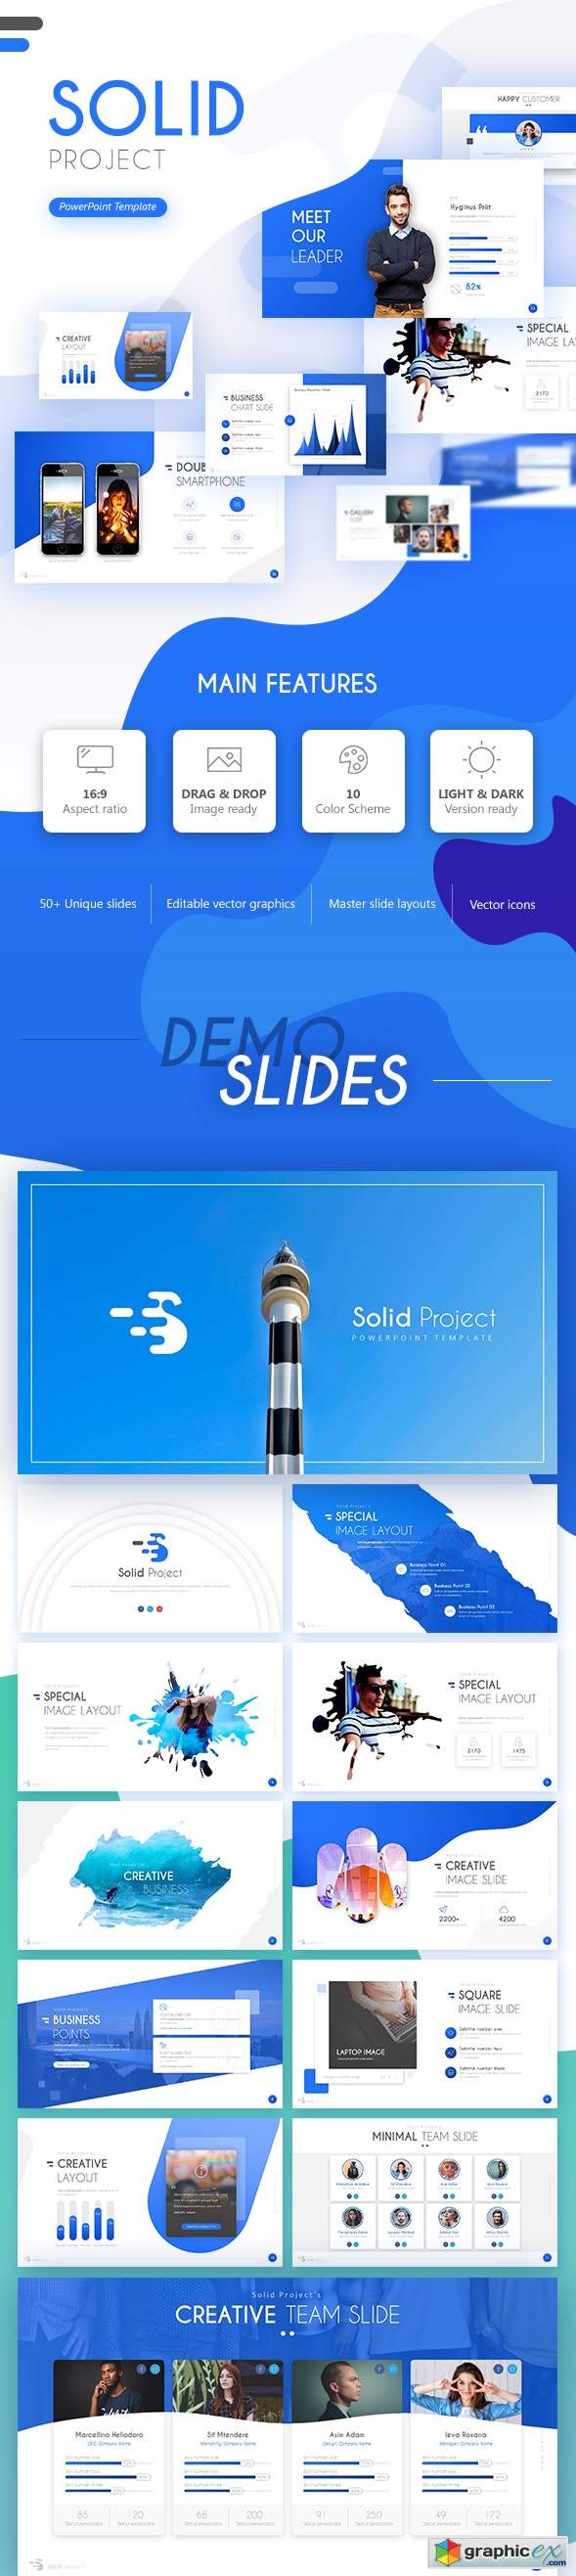 Solid Project PowerPoint Template